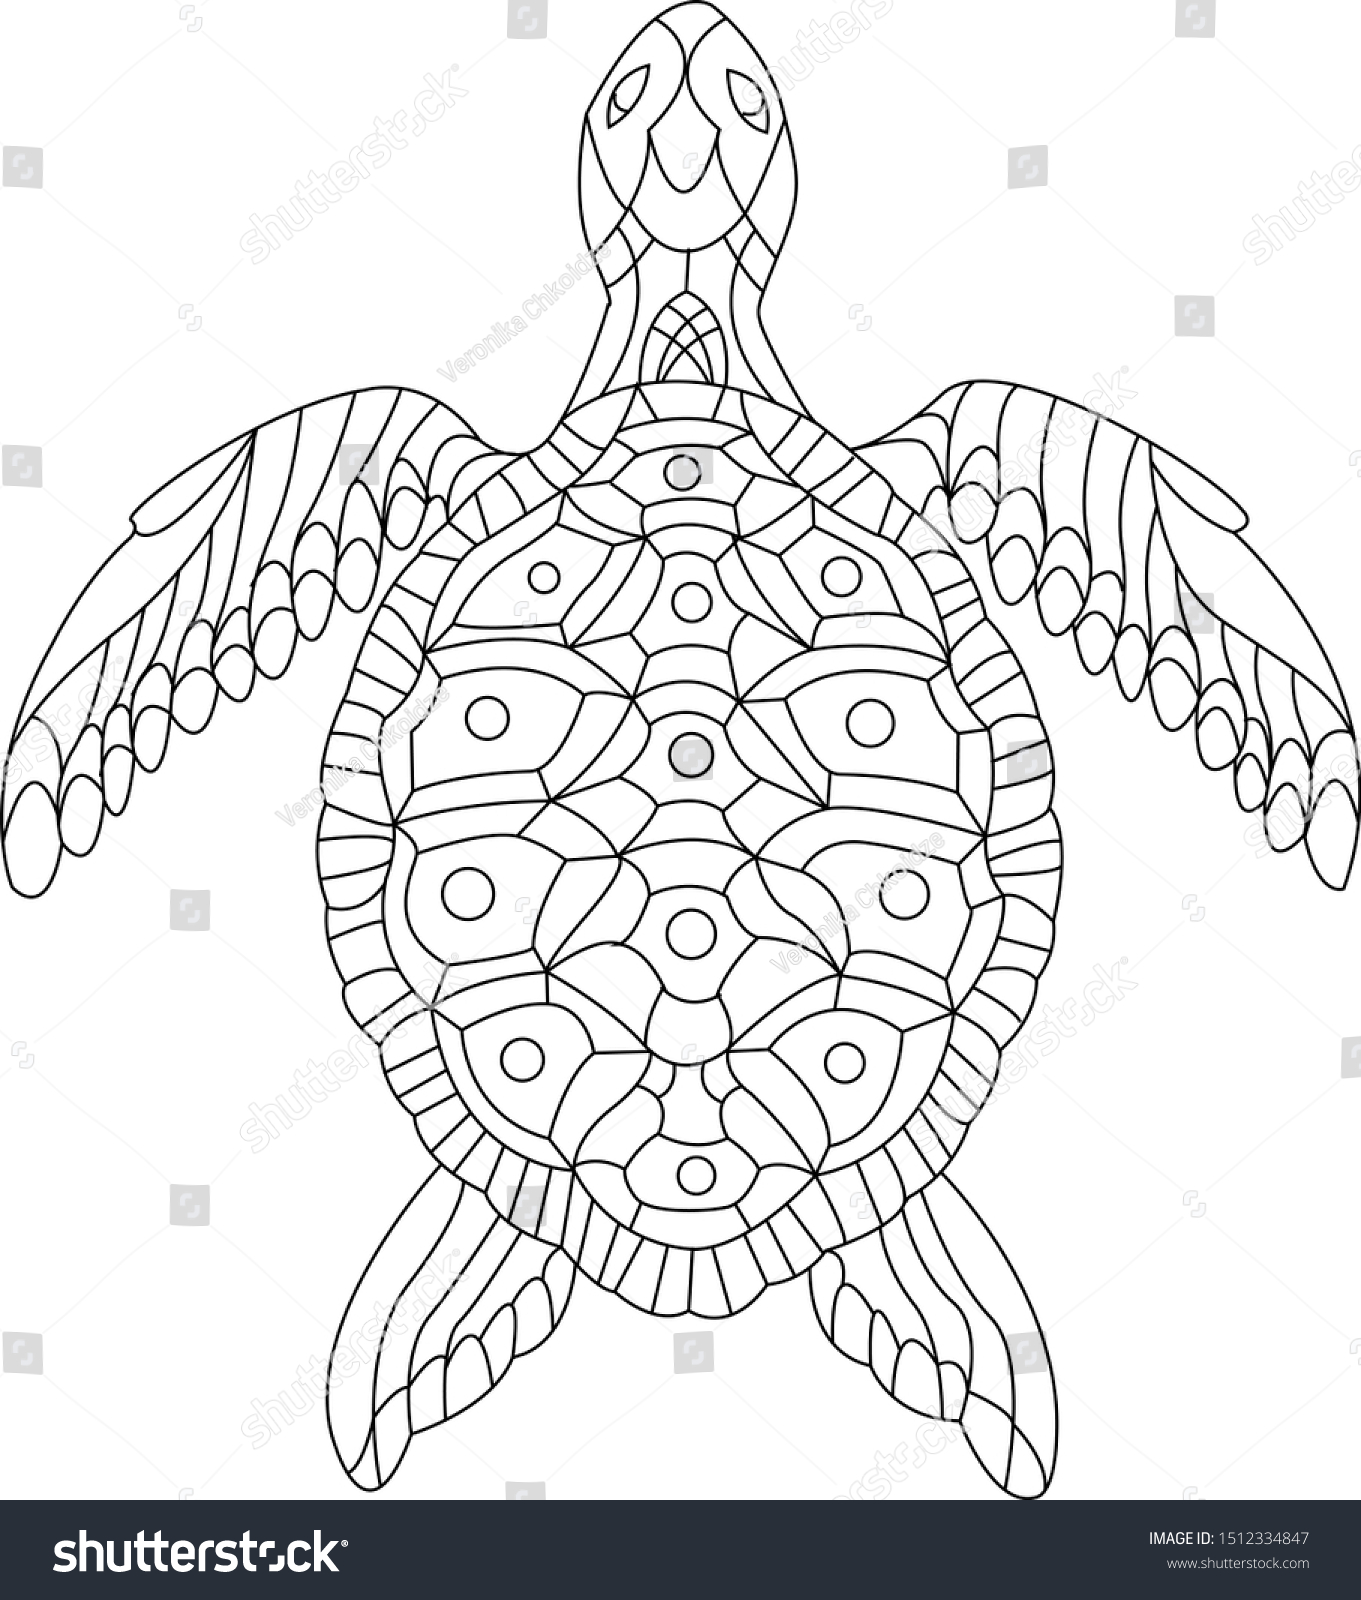 Turtle Coloring Page Adults Art Therapy Stock Illustration ...